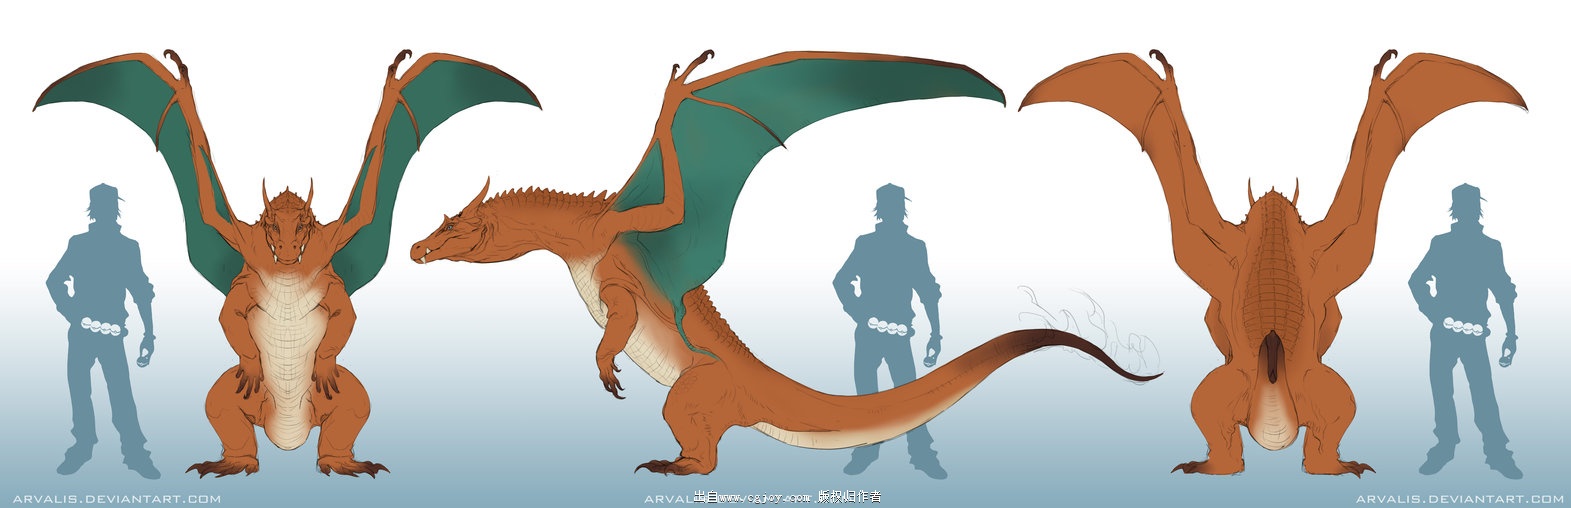 charizard_orthographic_by_arvalis-d8e075o.jpg